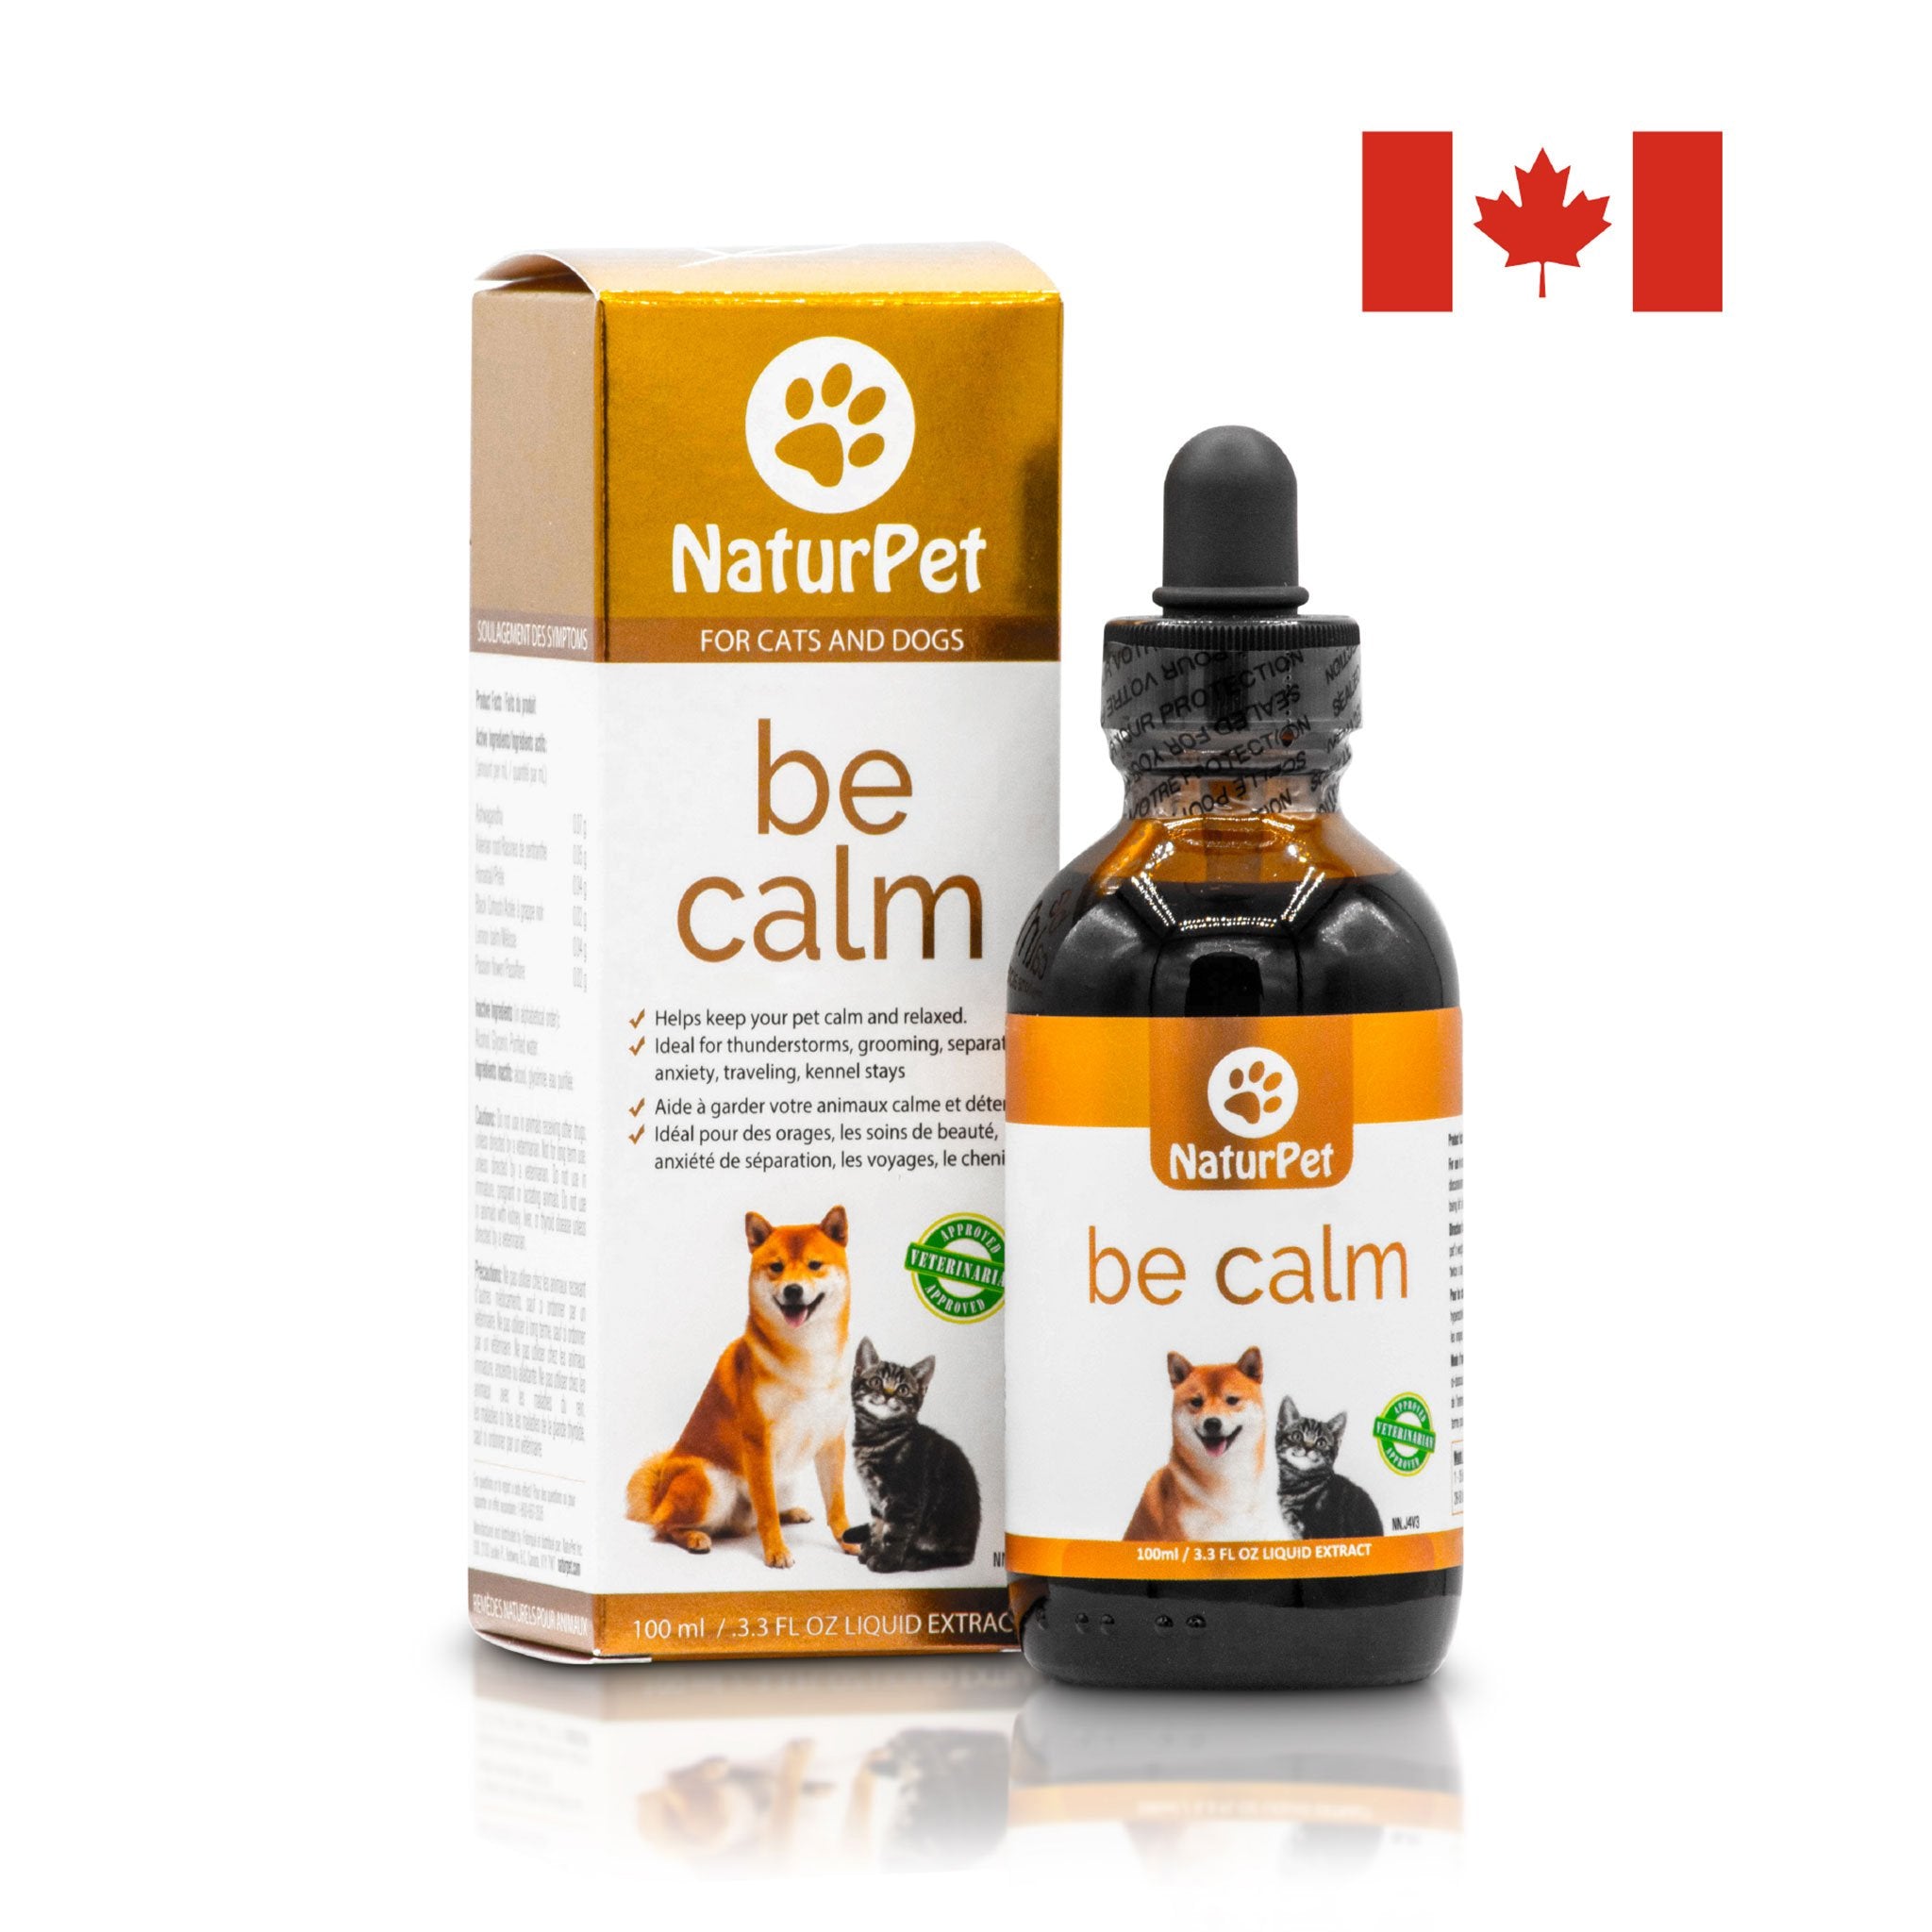 NaturPet Be Calm Product